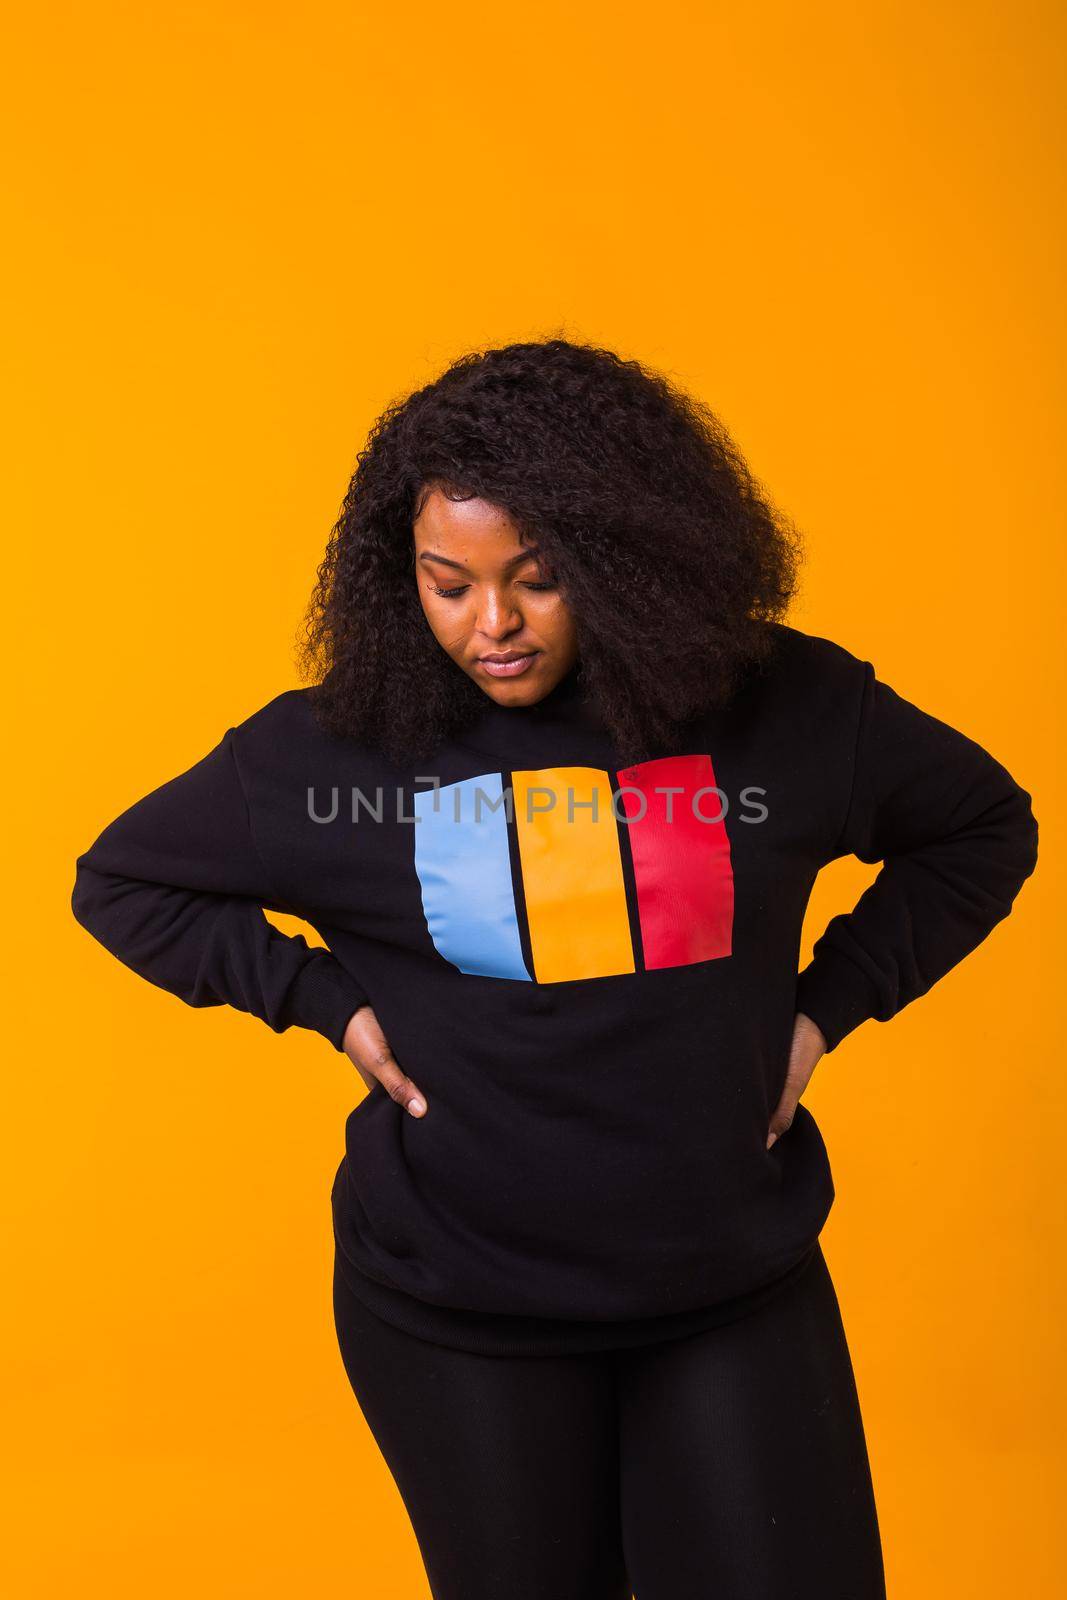 Beautiful African American woman having fun in black sweatshirt on a yellow background. Street fashion photo with afro hairstyle. by Satura86